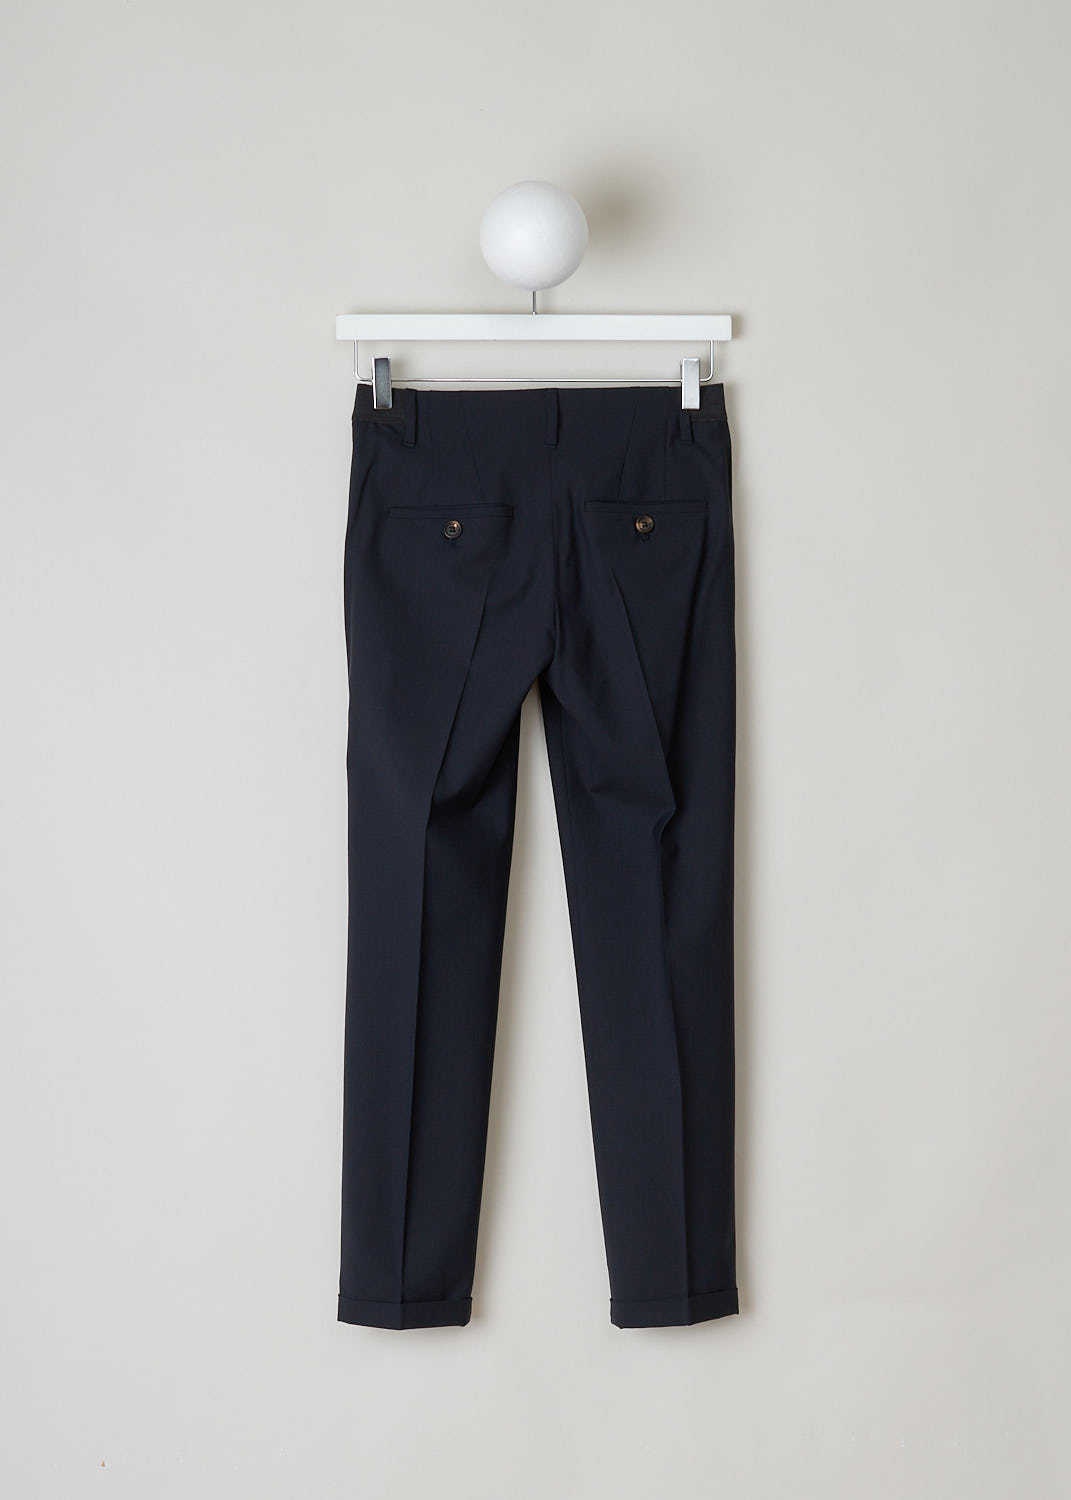 BRUNELLO CUCINELLI, NAVY BLUE PANTS WITH PARTY ELASTICATED WAISTBAND, M0W07P1500_C060, Blue, Back, Navy blue pants with partly elasticated waistline. A clasp and zipper function as the closing option. The pants feature forward slanted pockets in the front, and two buttoned welt pockets in the back. Along the length of the pant leg, centre creases can be found. These pants have a folded hem.
